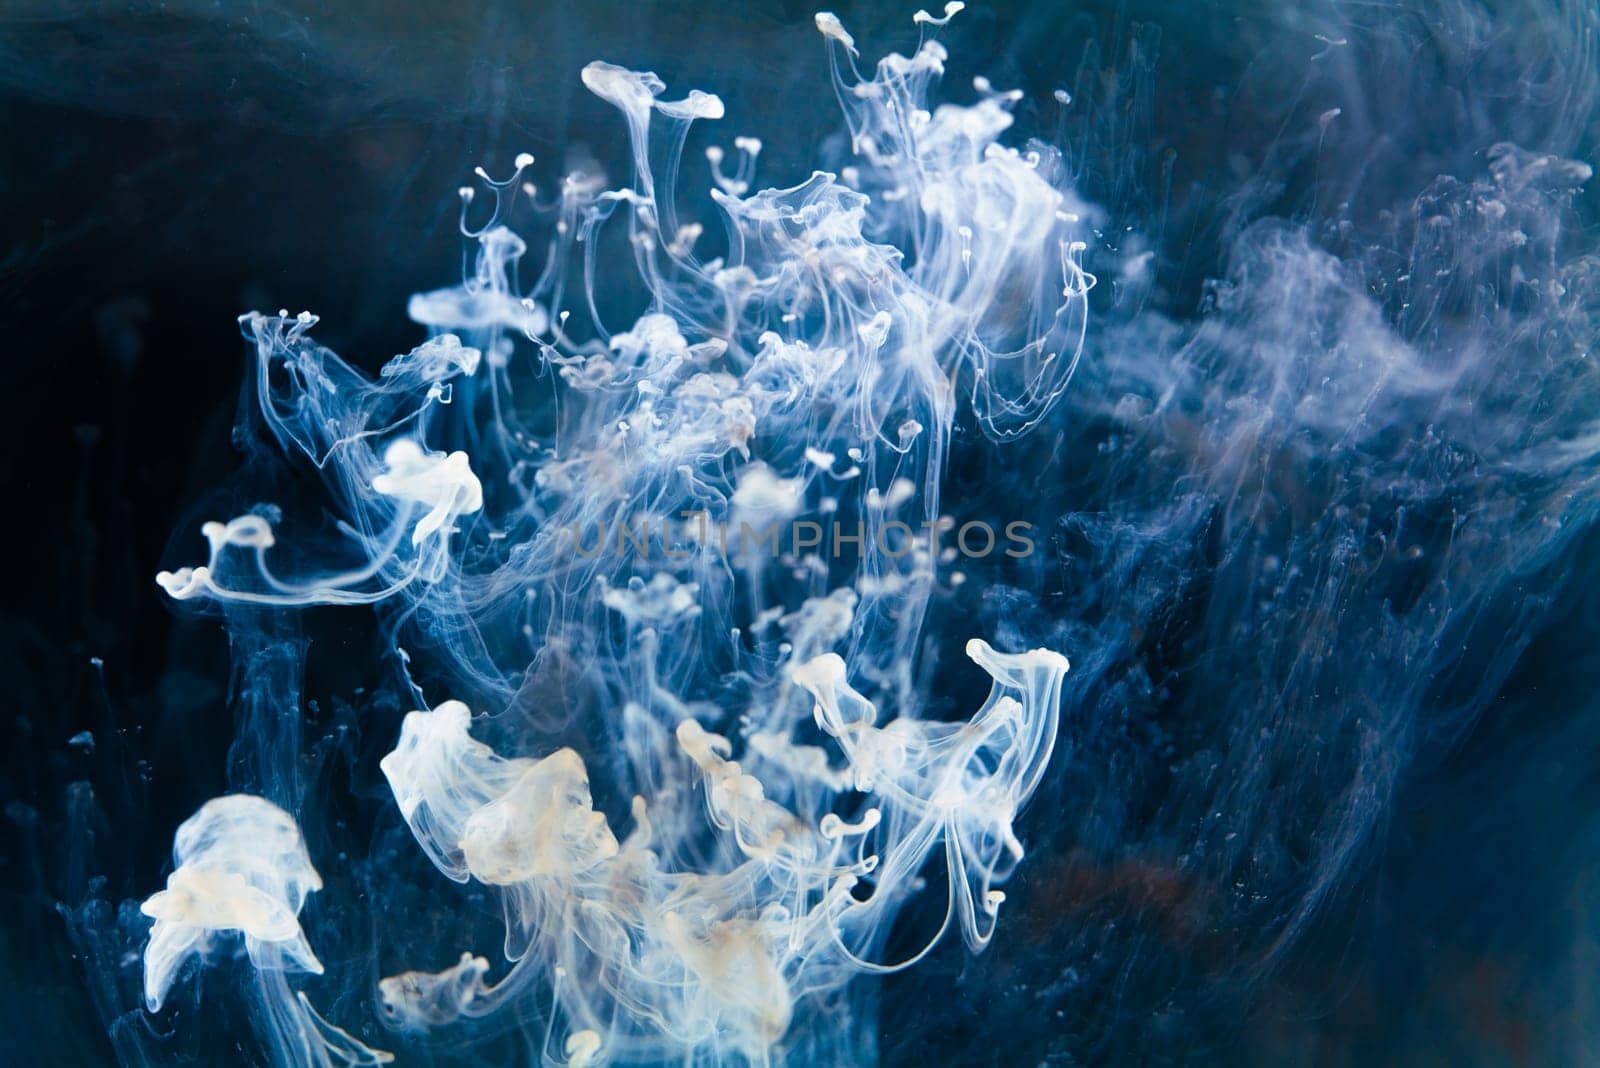 white Ink dropped into the water and photographed while in motion. Paint swirling in water. Mesmerizing dance of inky tendrils unfurling through azure waters.